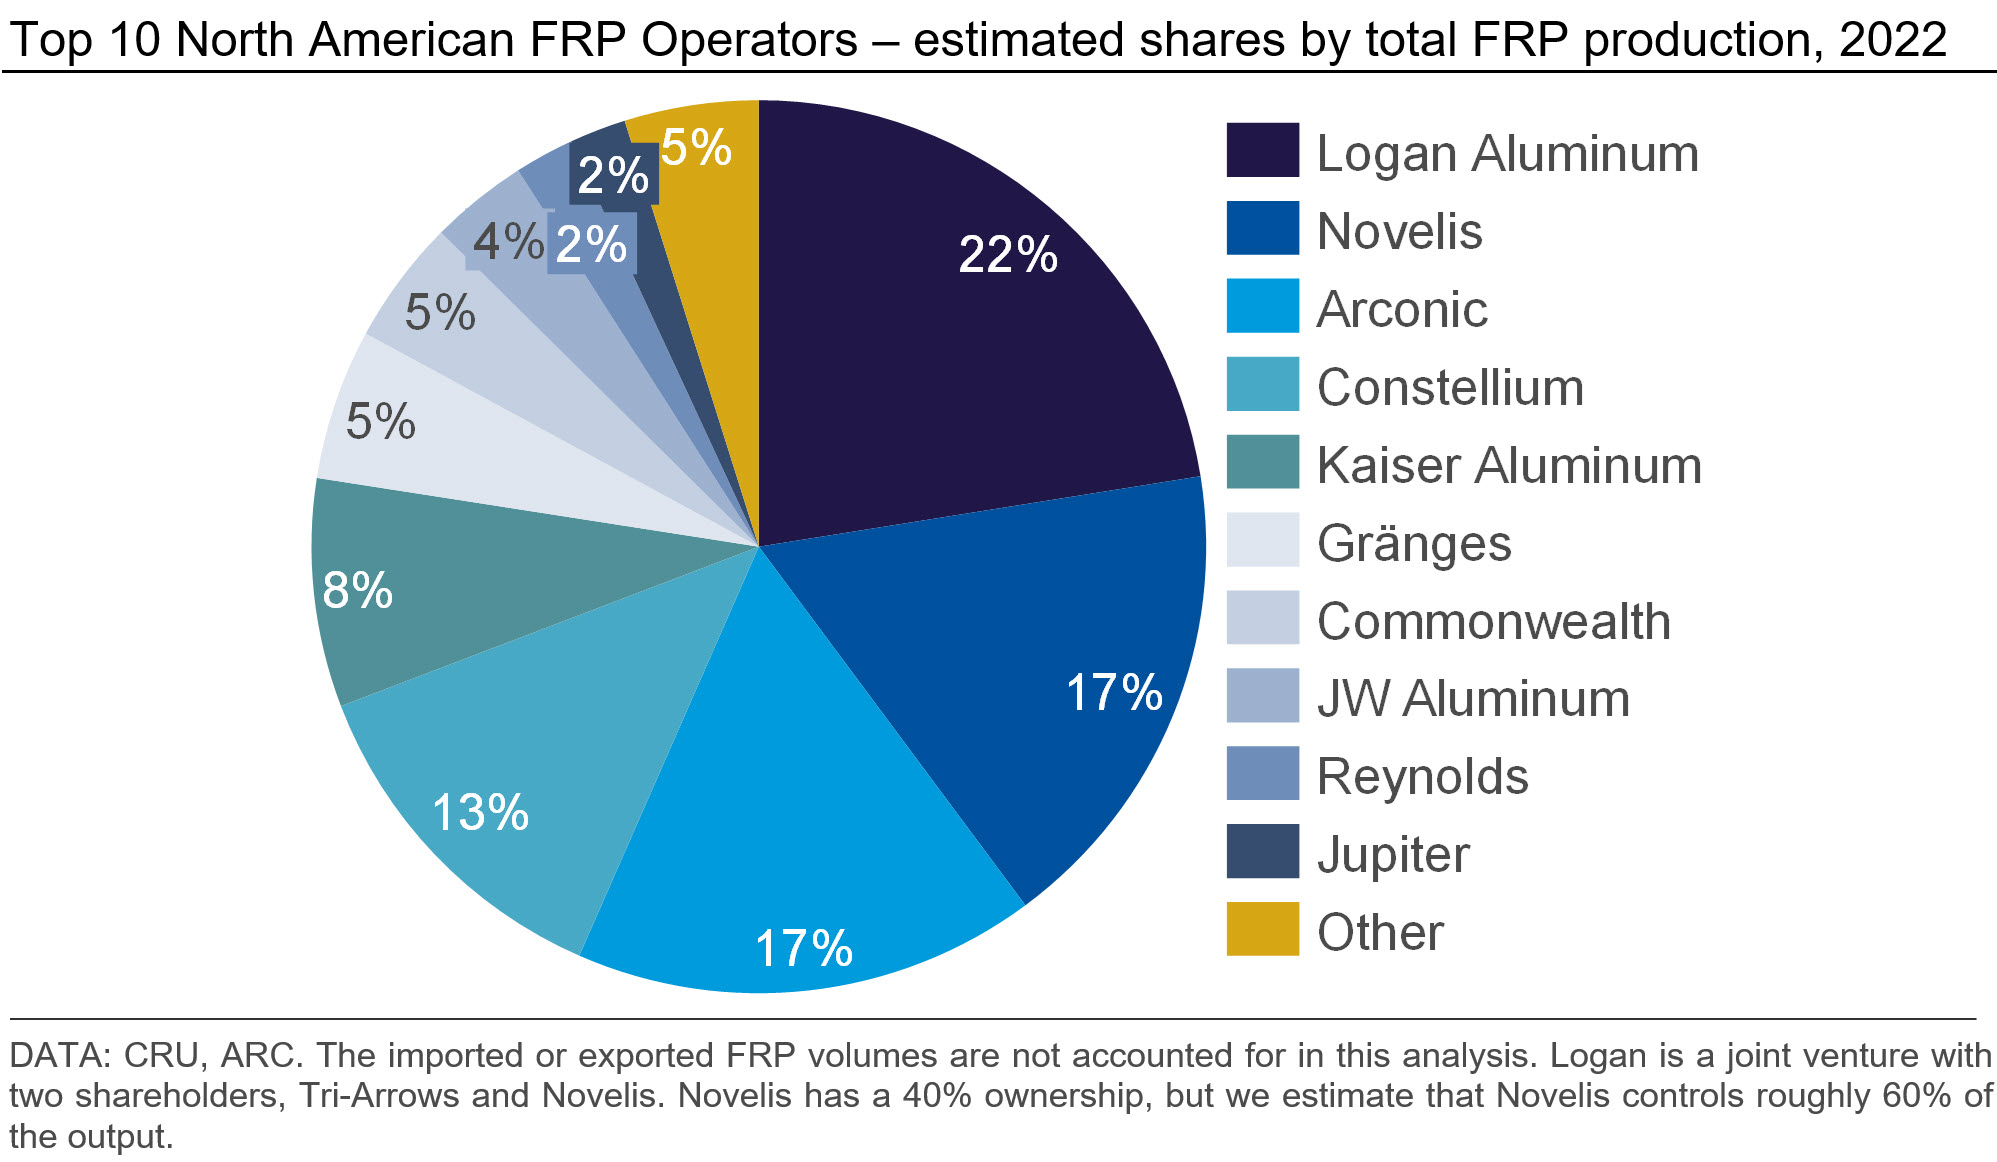 A chart showing the top 10 North American FRP operators based on estimated shares by total FRP production in 2022.